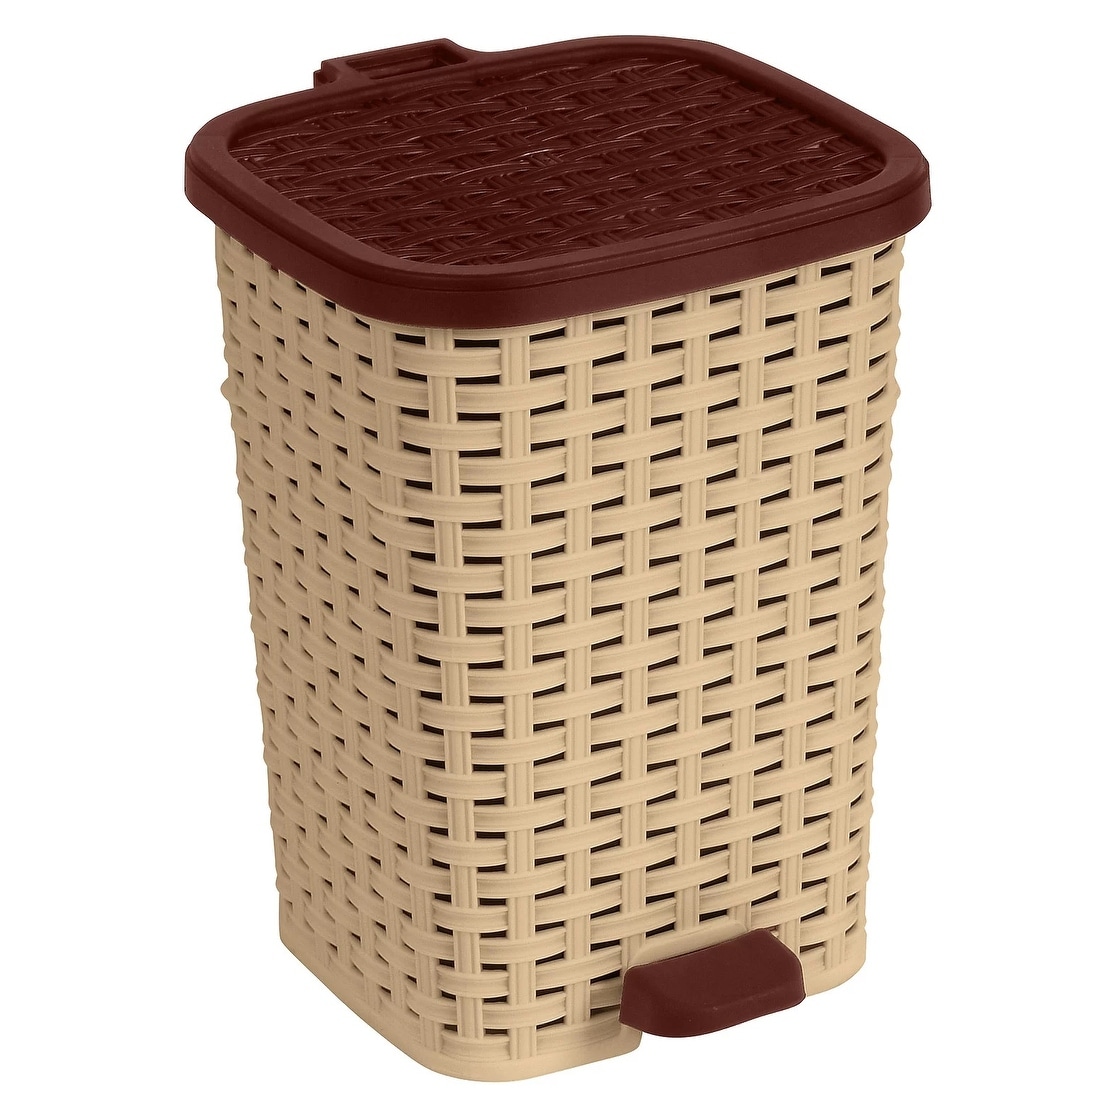 https://ak1.ostkcdn.com/images/products/is/images/direct/3a5cd8fc0f1d725f2590b9721b315fb06952d105/12-qt-Wicker-Step-Trash-Can.jpg